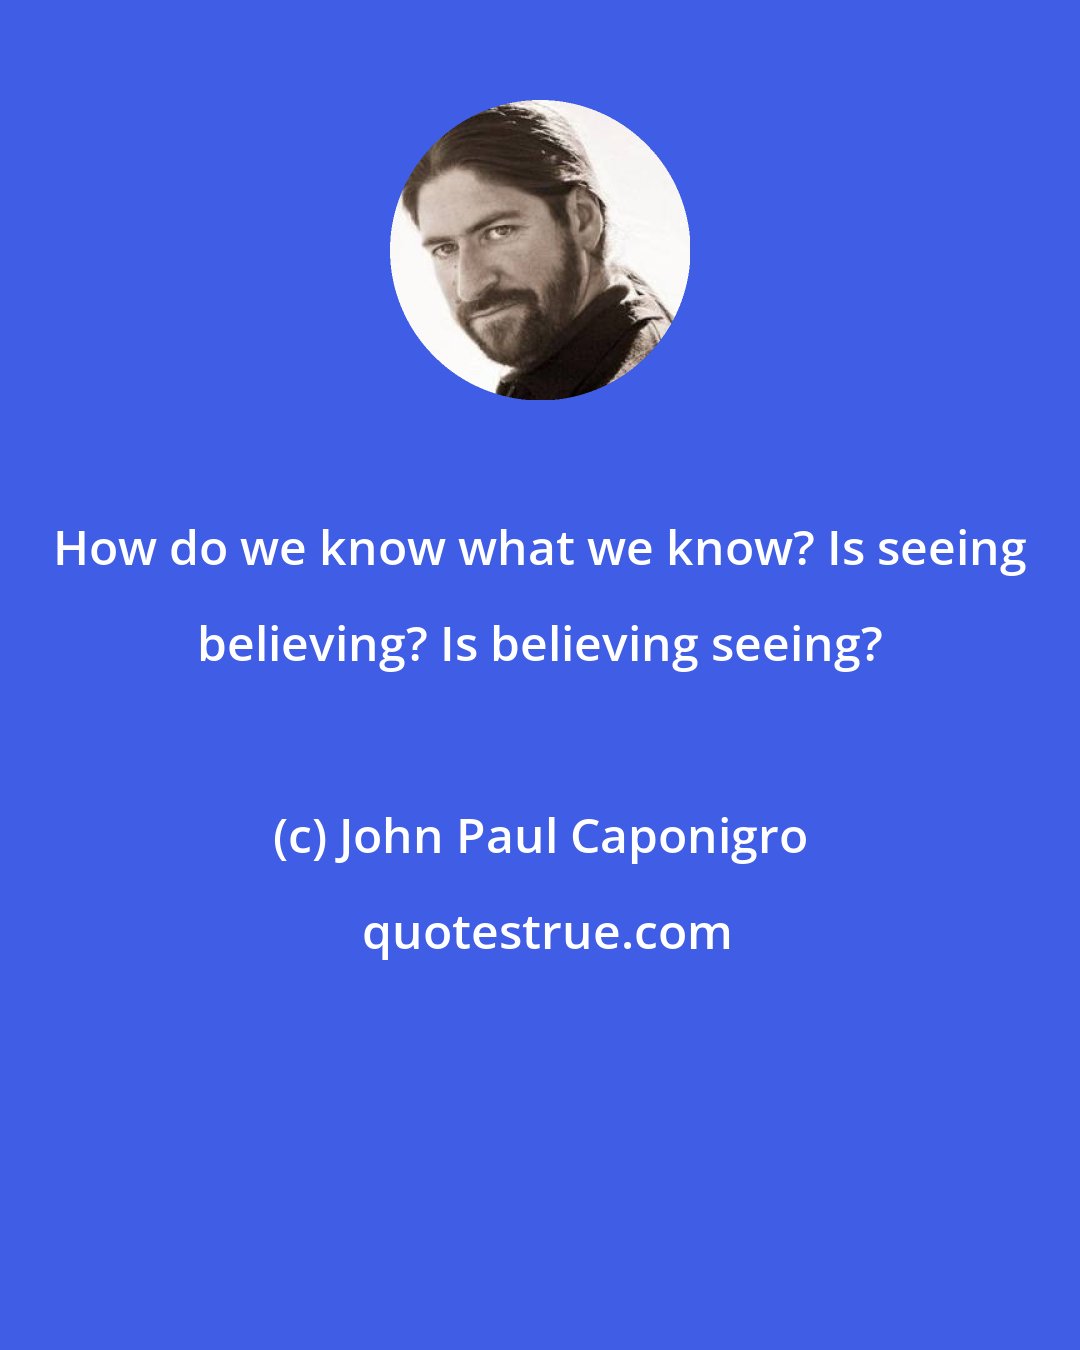 John Paul Caponigro: How do we know what we know? Is seeing believing? Is believing seeing?